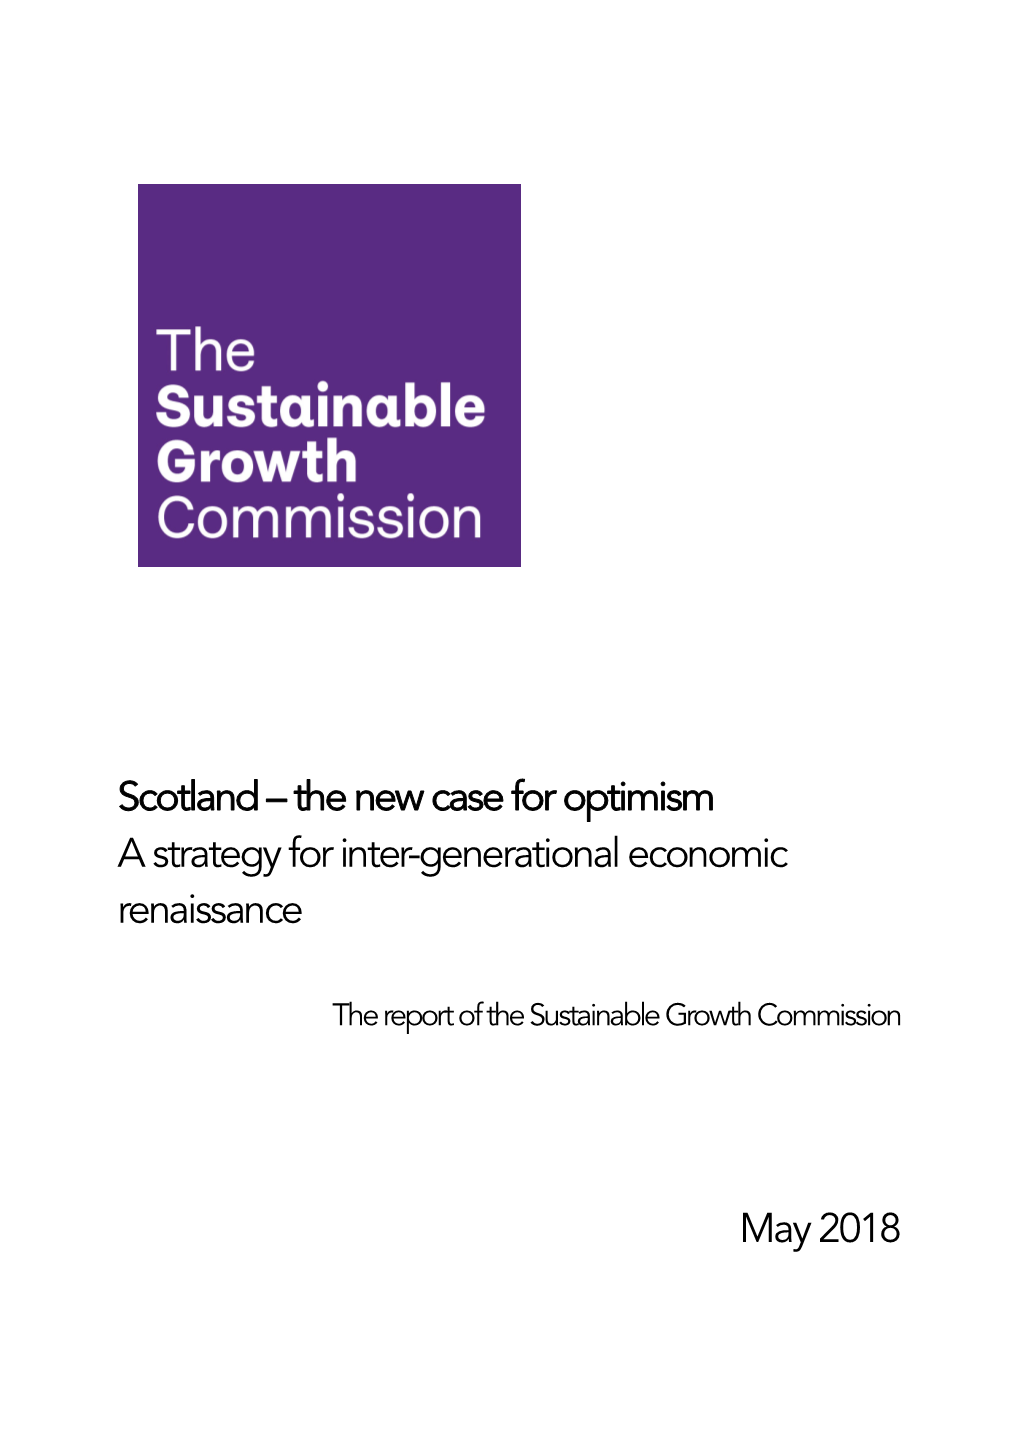 Sustainable Growth Commission